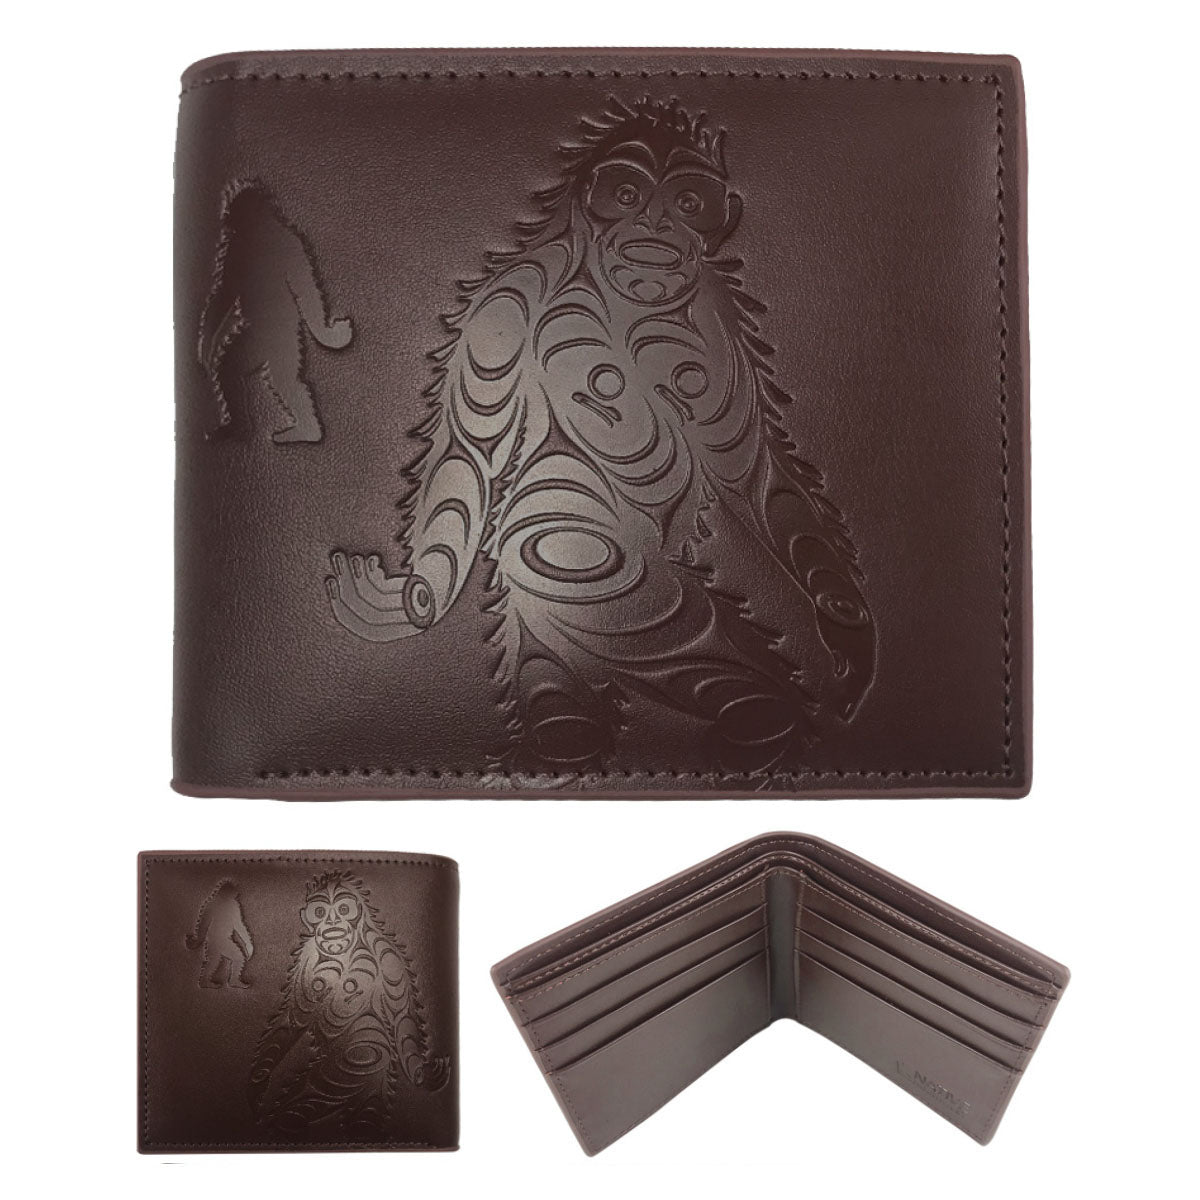 Leather Wallet Sasquatch - Leather Wallet Sasquatch -  - House of Himwitsa Native Art Gallery and Gifts